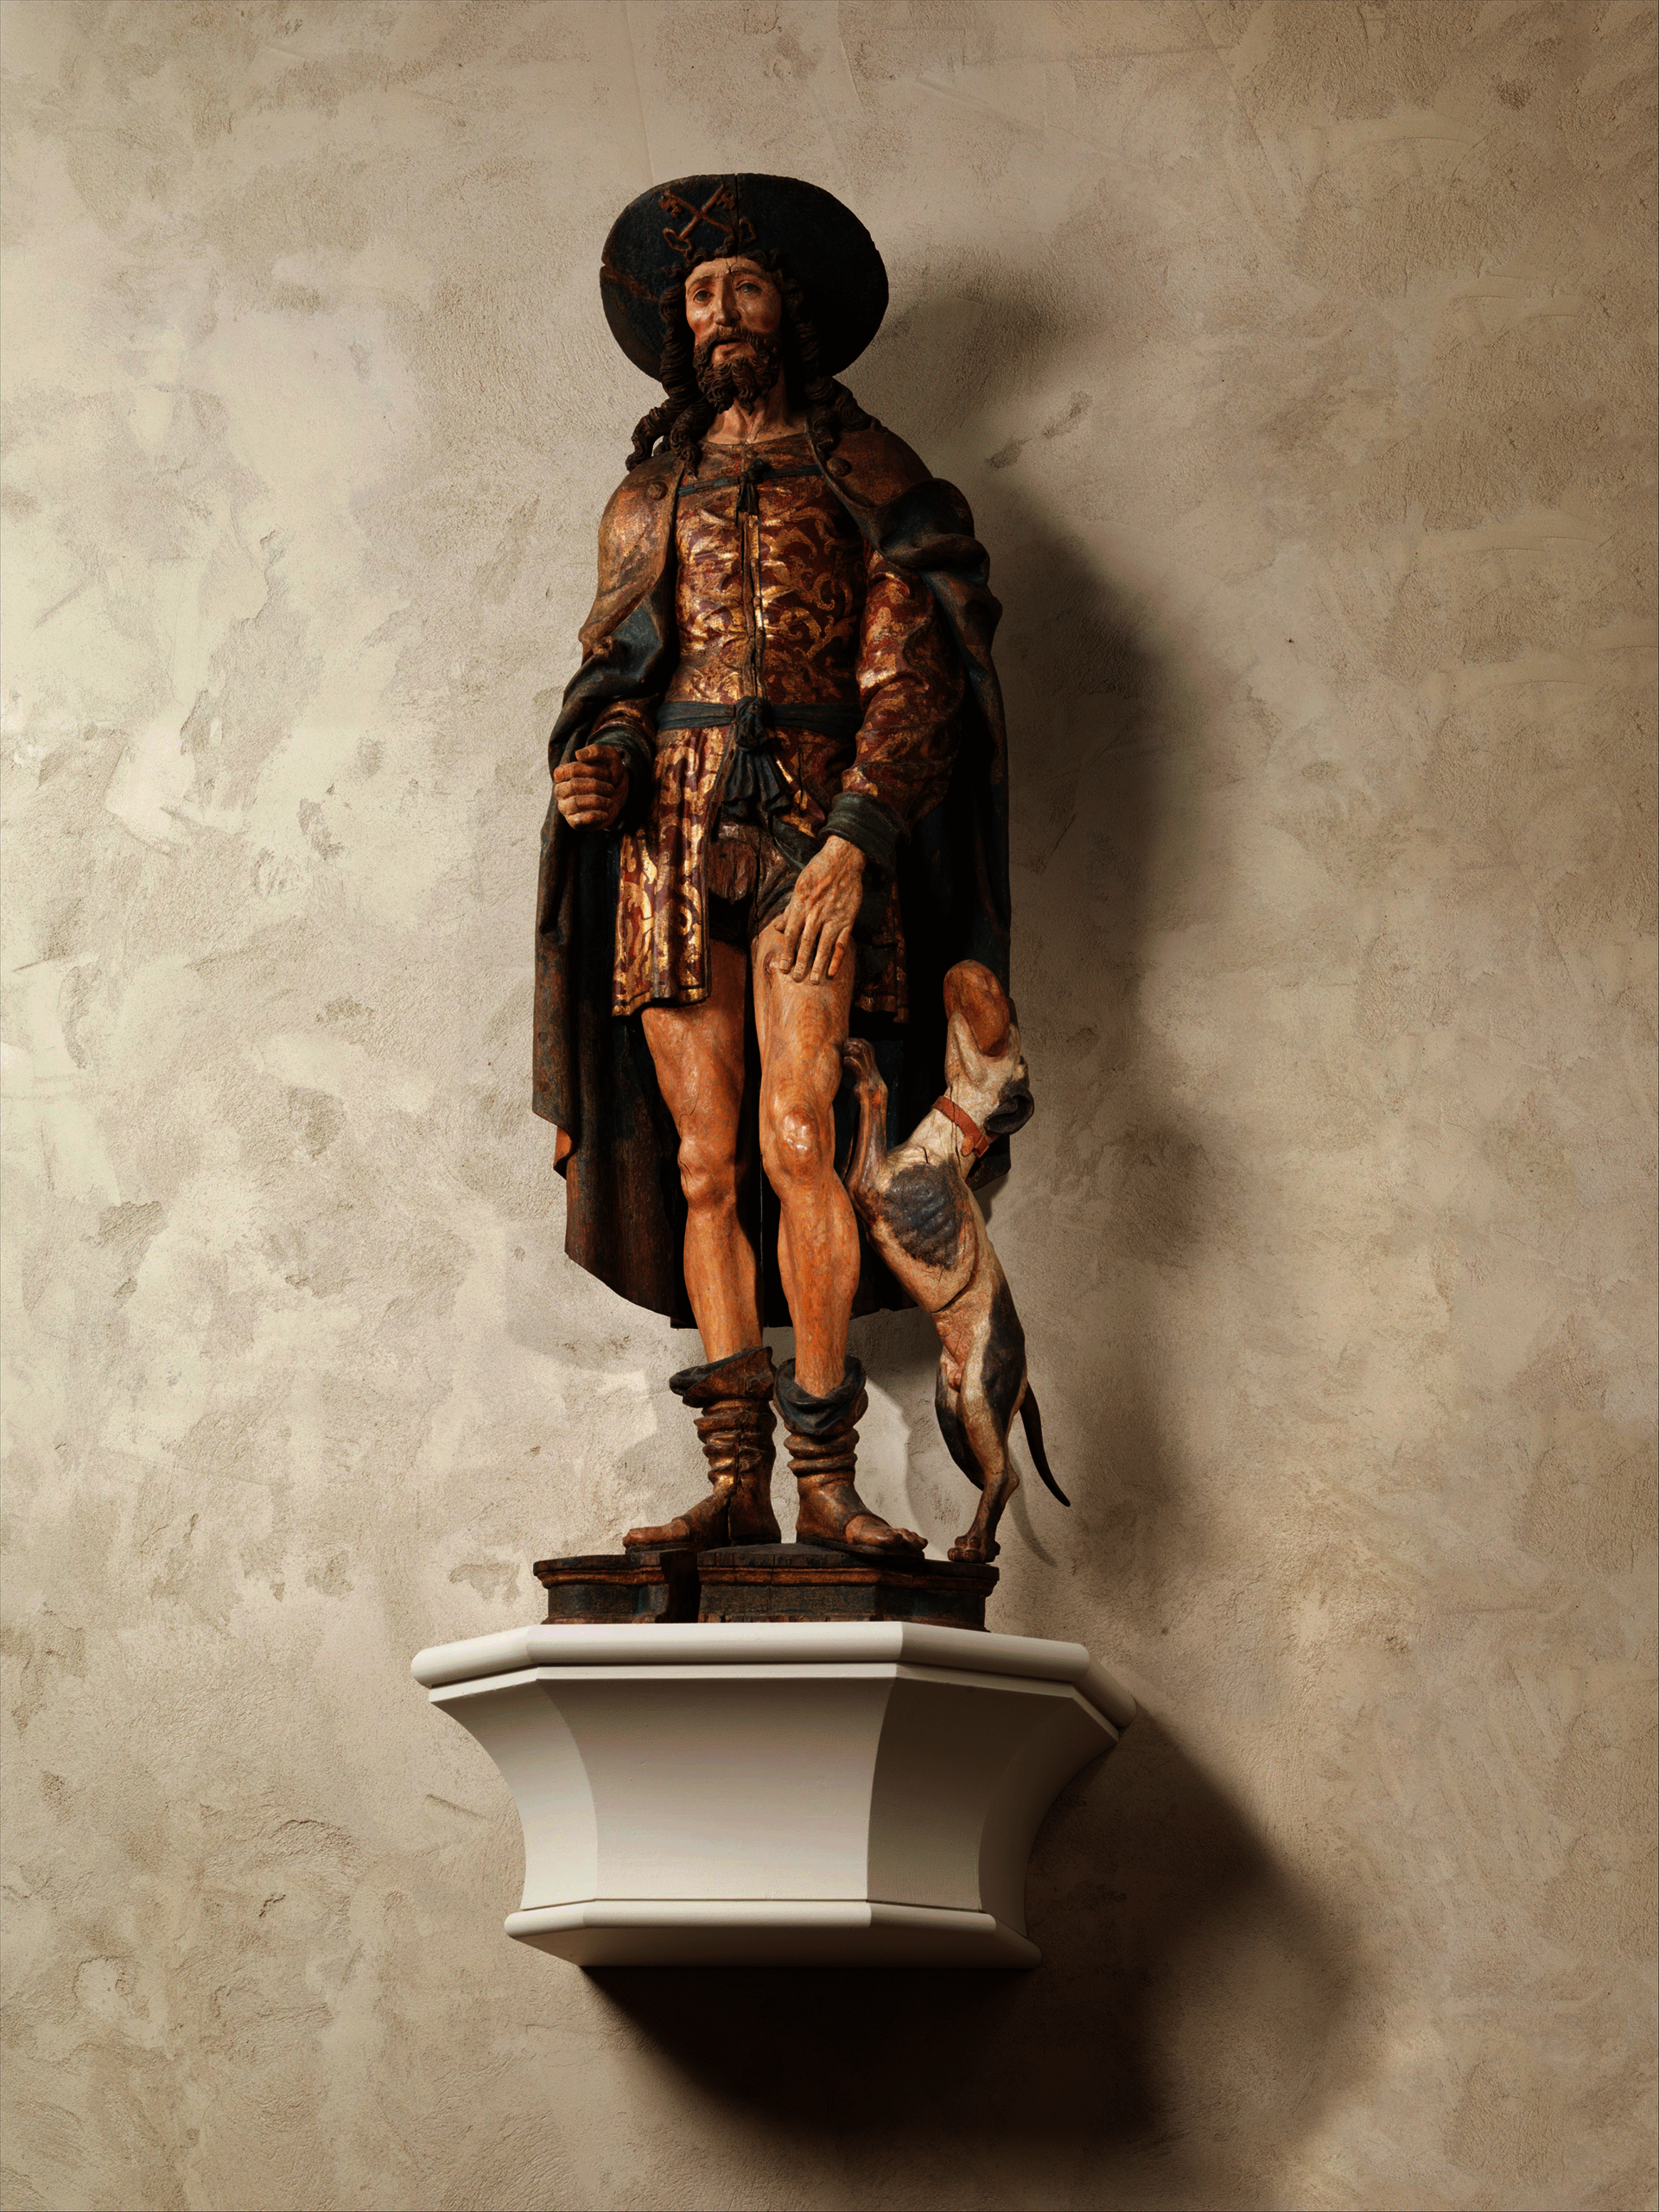 Painted sculpture of a bearded man in an elaborate short tunic and cloak. His left hand rests on his bare thigh. A dog stands on his back legs beside him.